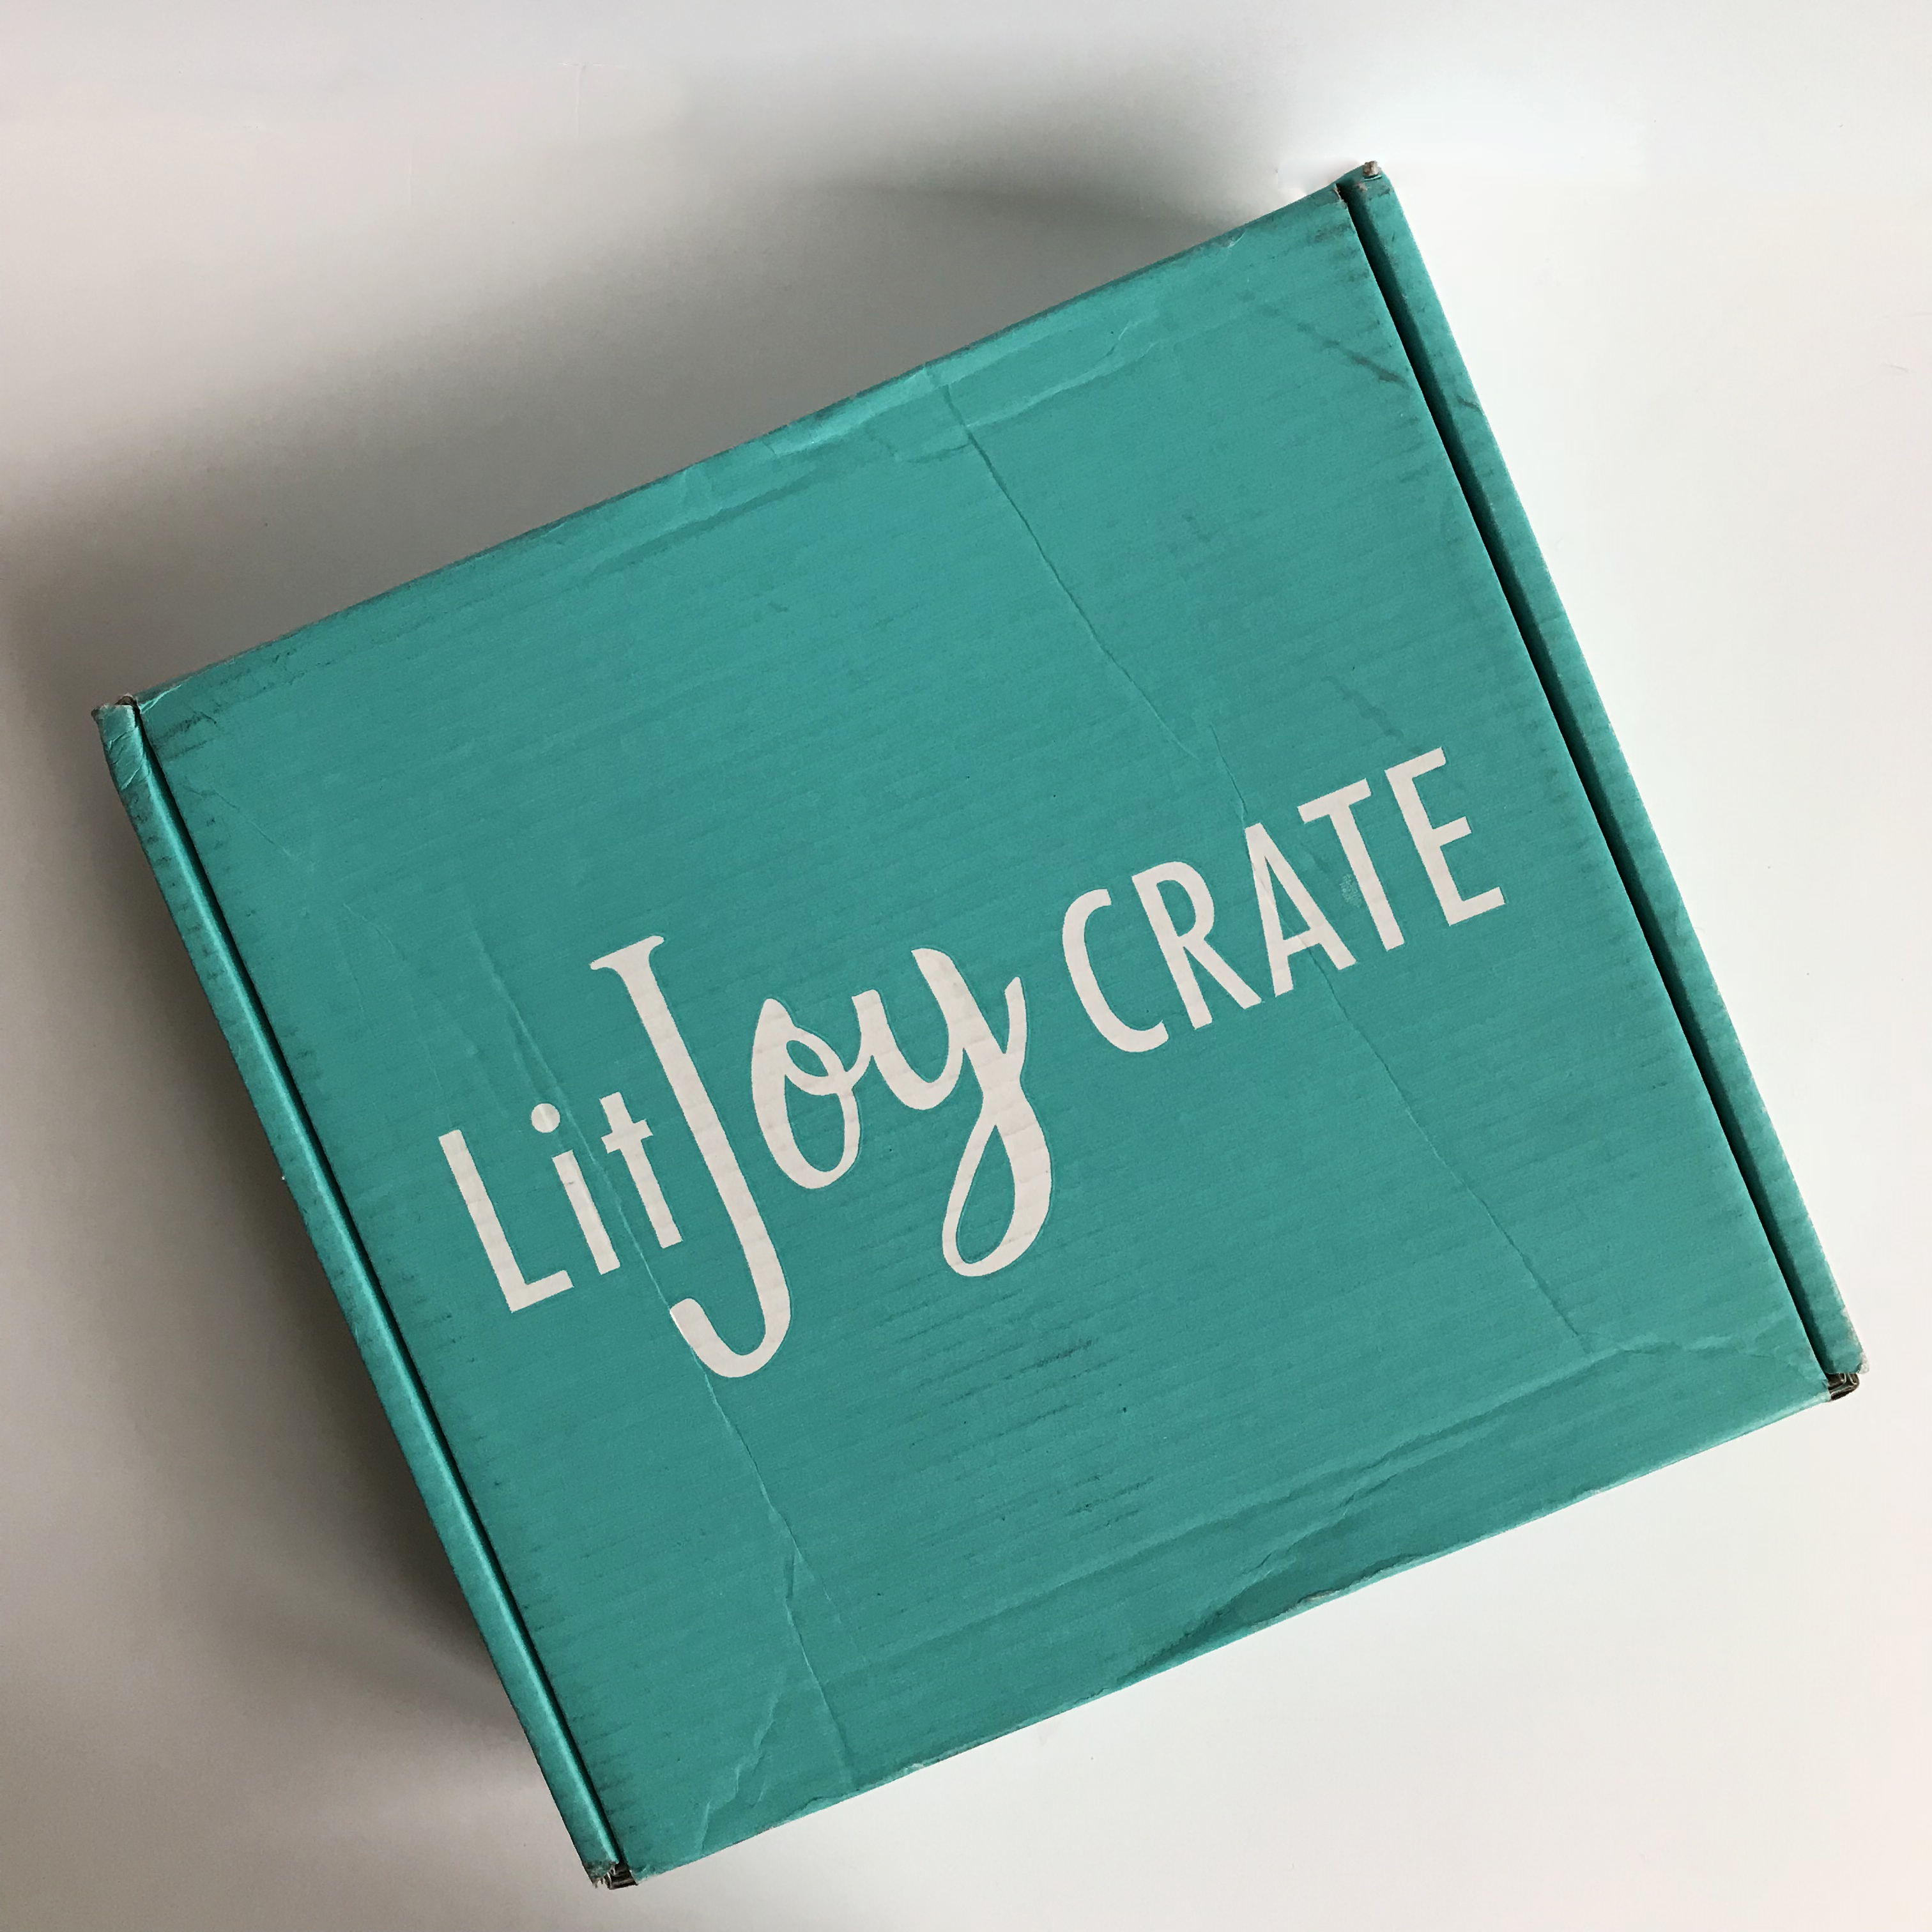 LitJoy Crate Picture Book Box Review + Coupon – October 2017